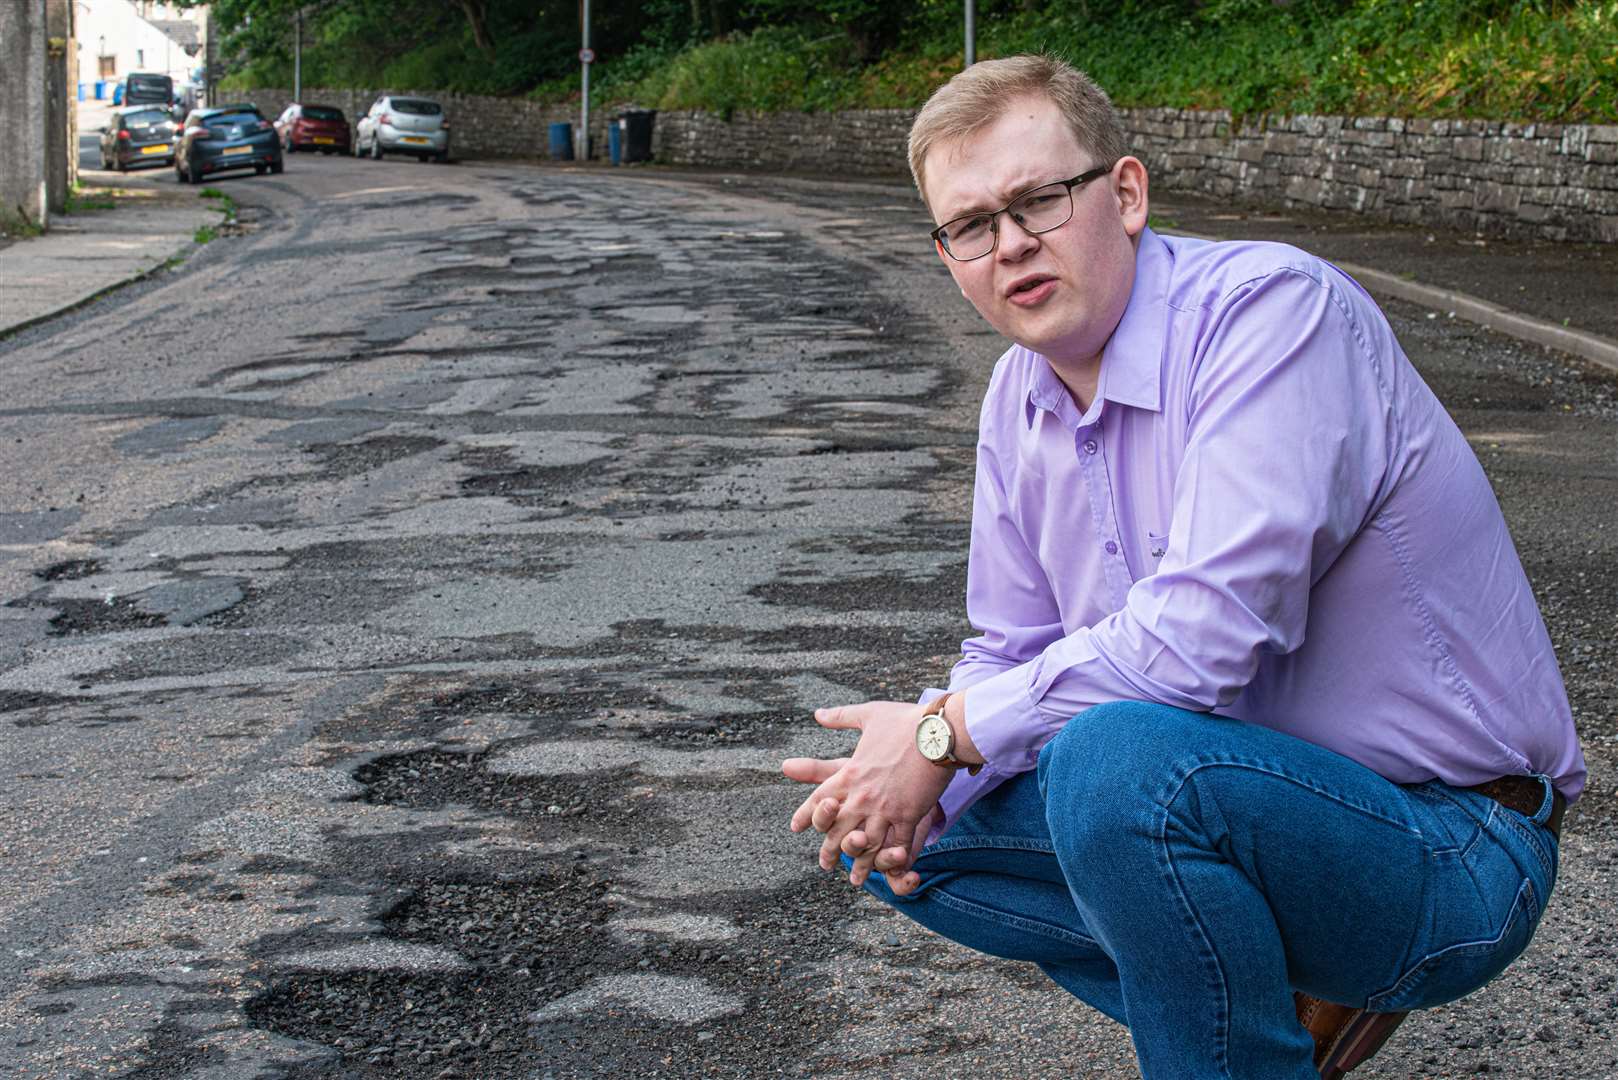 Council candidate Daniel Ross beside the damaged road surface in Wick's Union Street.